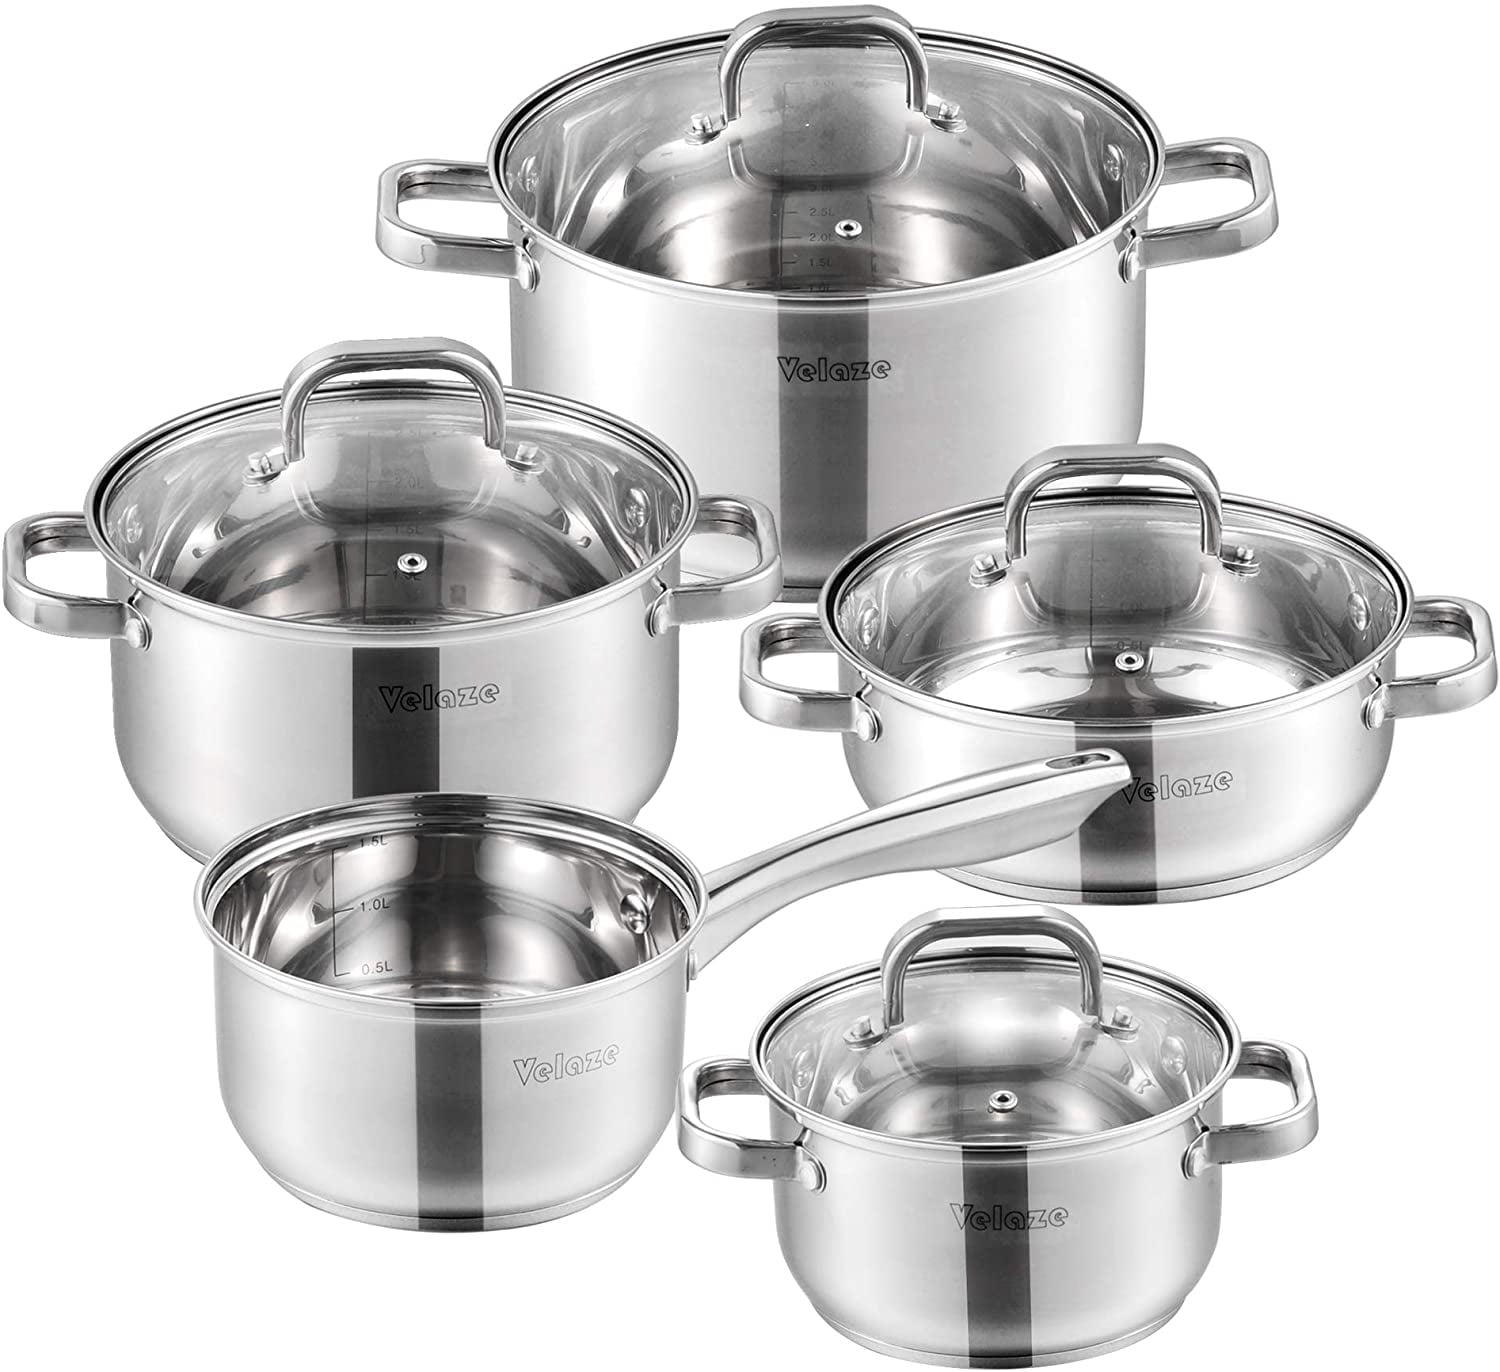 Pan Set Cookware Set 9-tlg Stainless Steel 3 Pots Casserole and Steam Cooker 